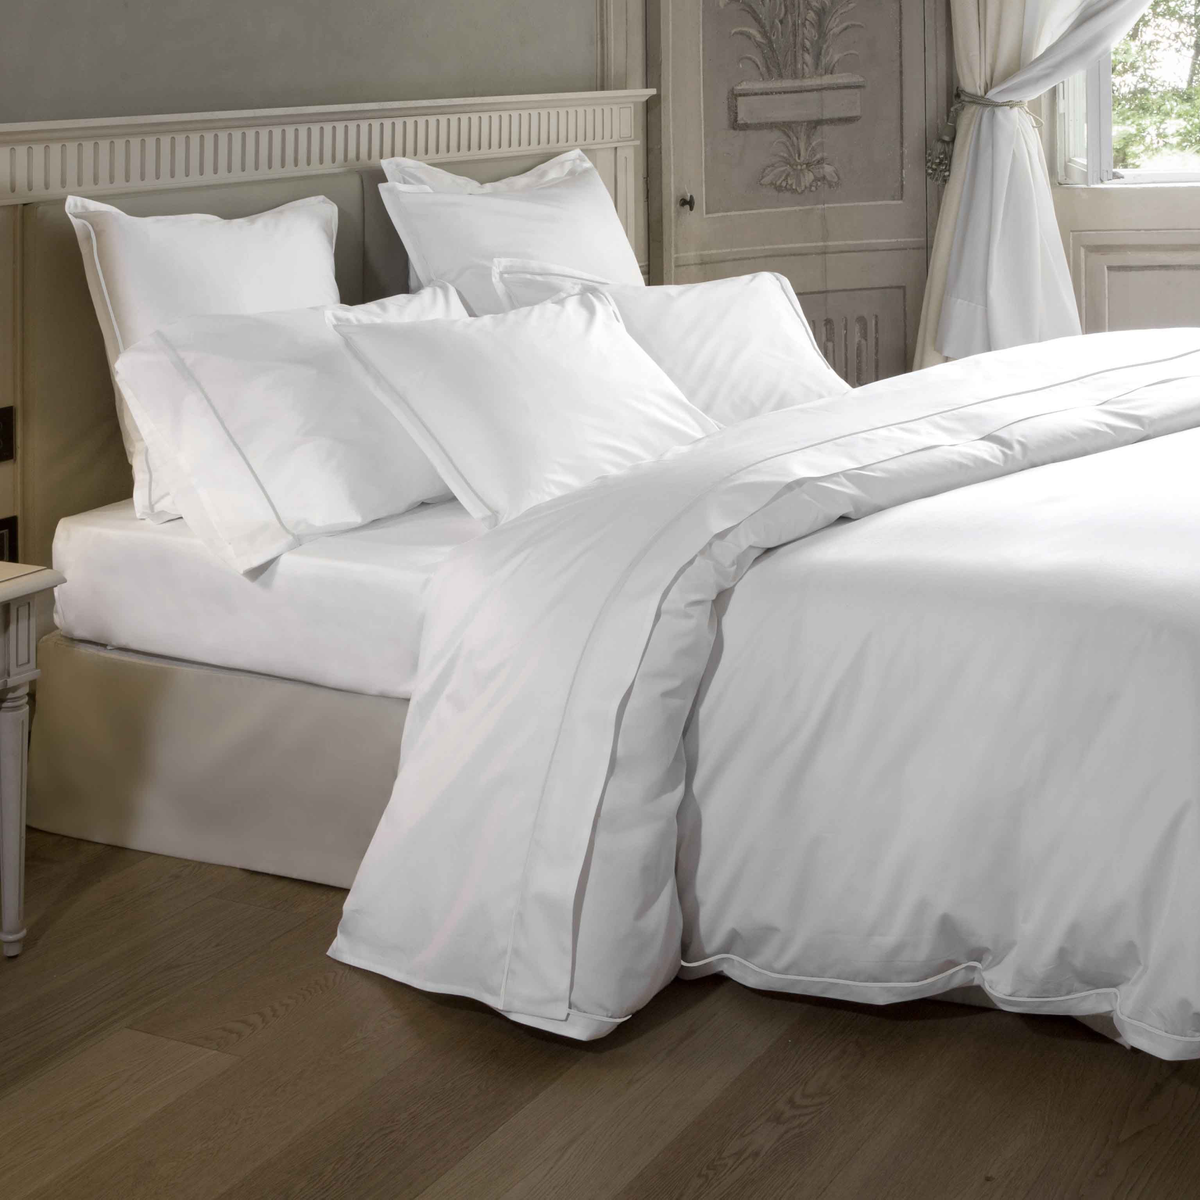 Full Bed Dressed in Signoria Luce Bedding in White Color